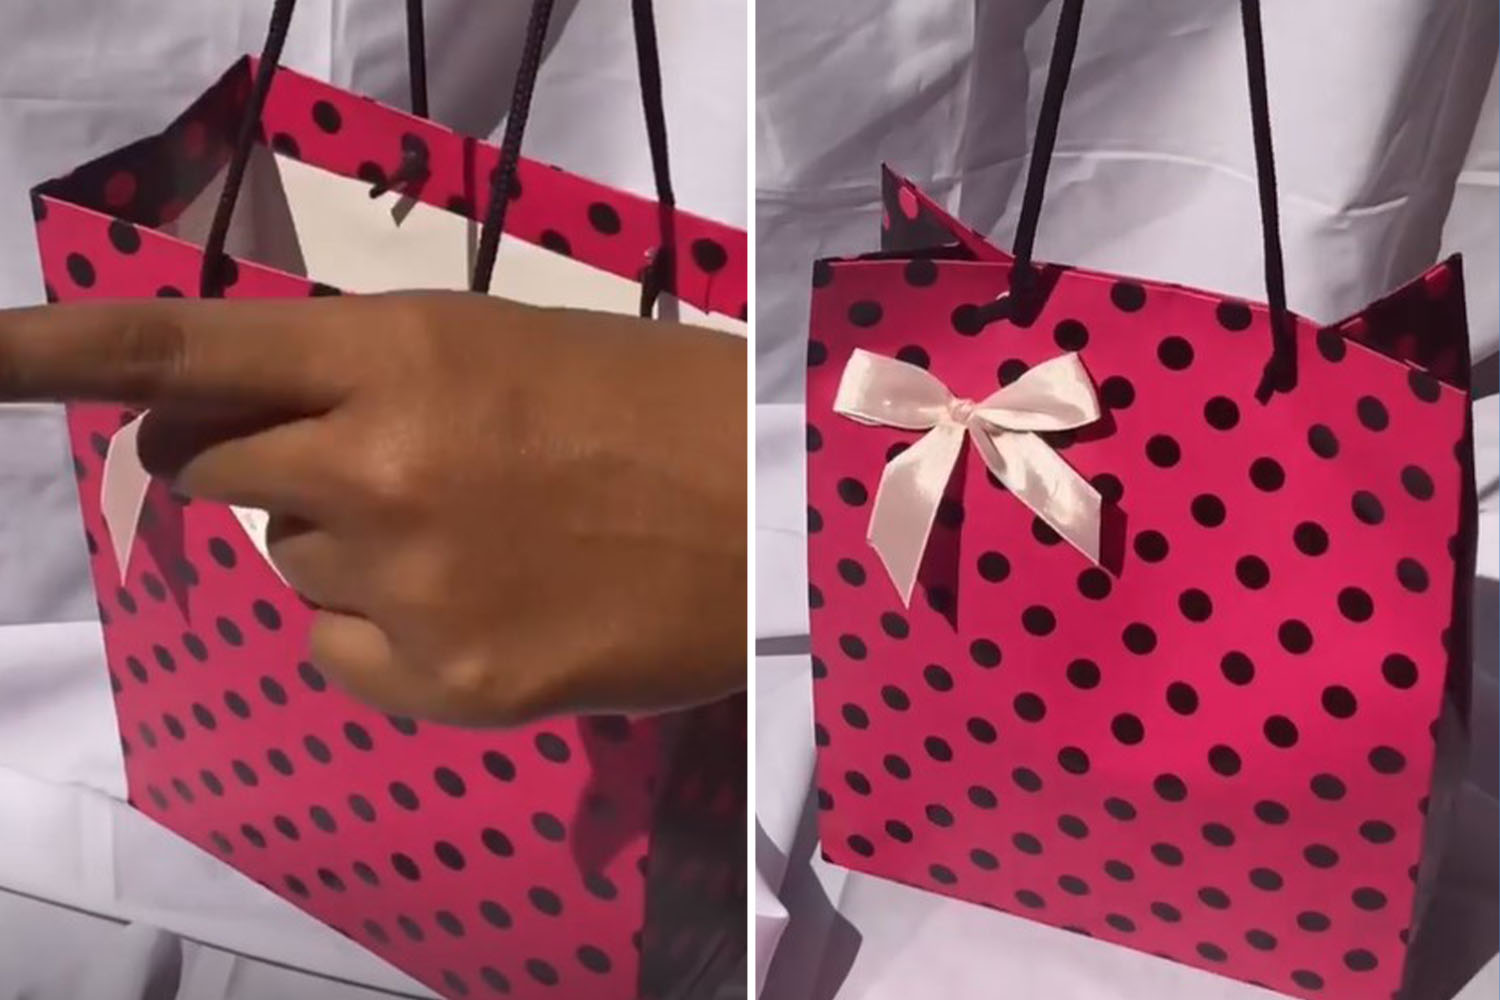 You've been using gift bags all wrong - my easy way will keep presents hidden